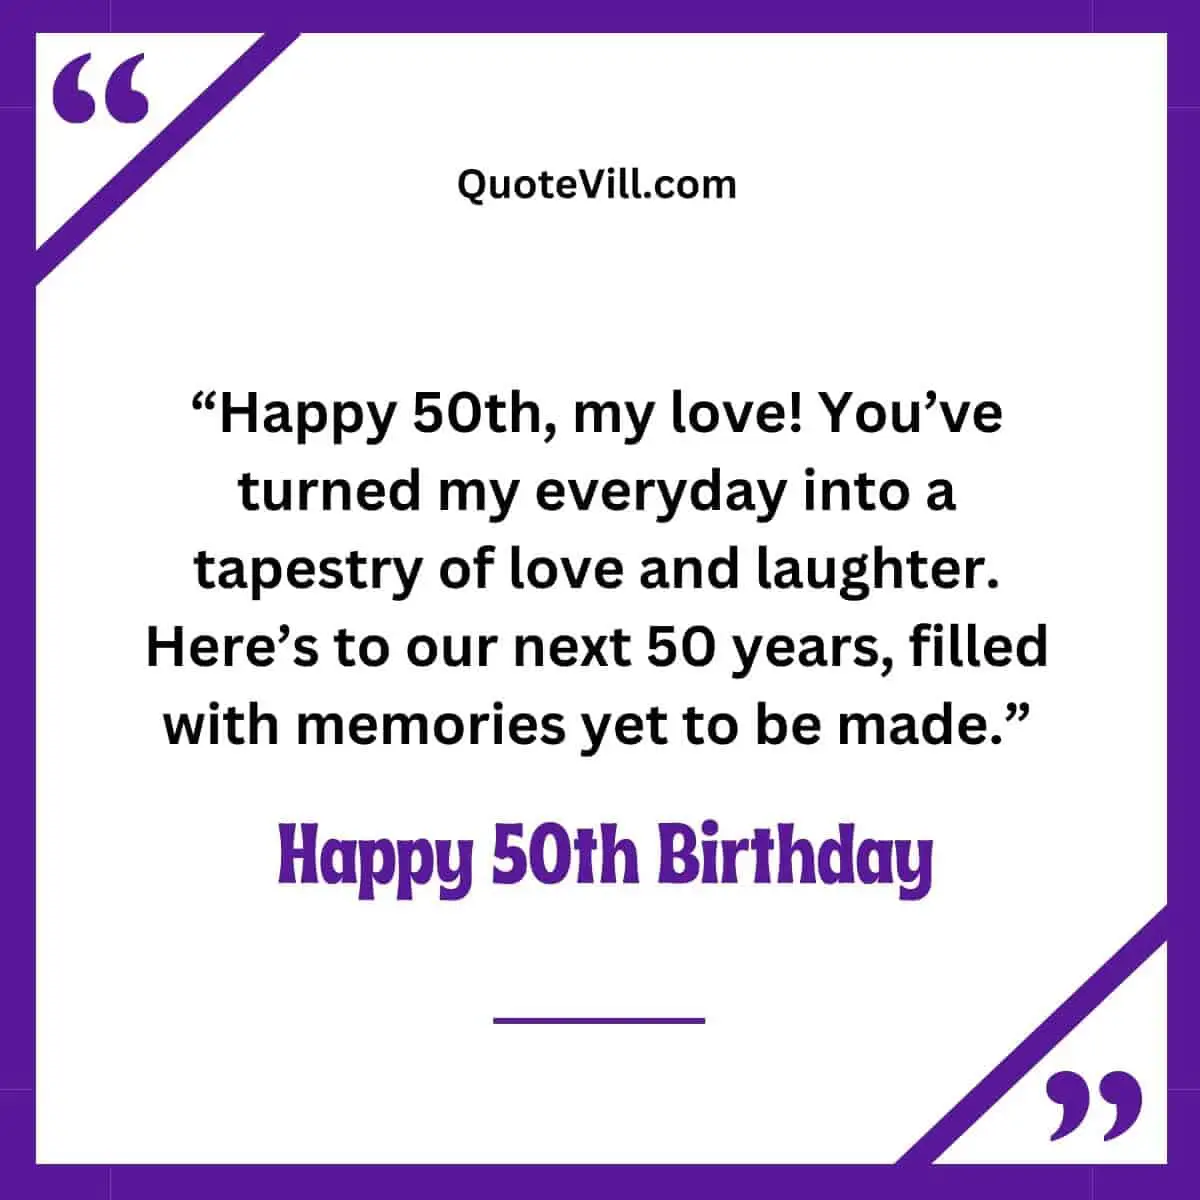 Happy 50th, my love! You've turned my everyday into a tapestry of love and laughter. Here's to our next 50 years, filled with memories yet to be made.